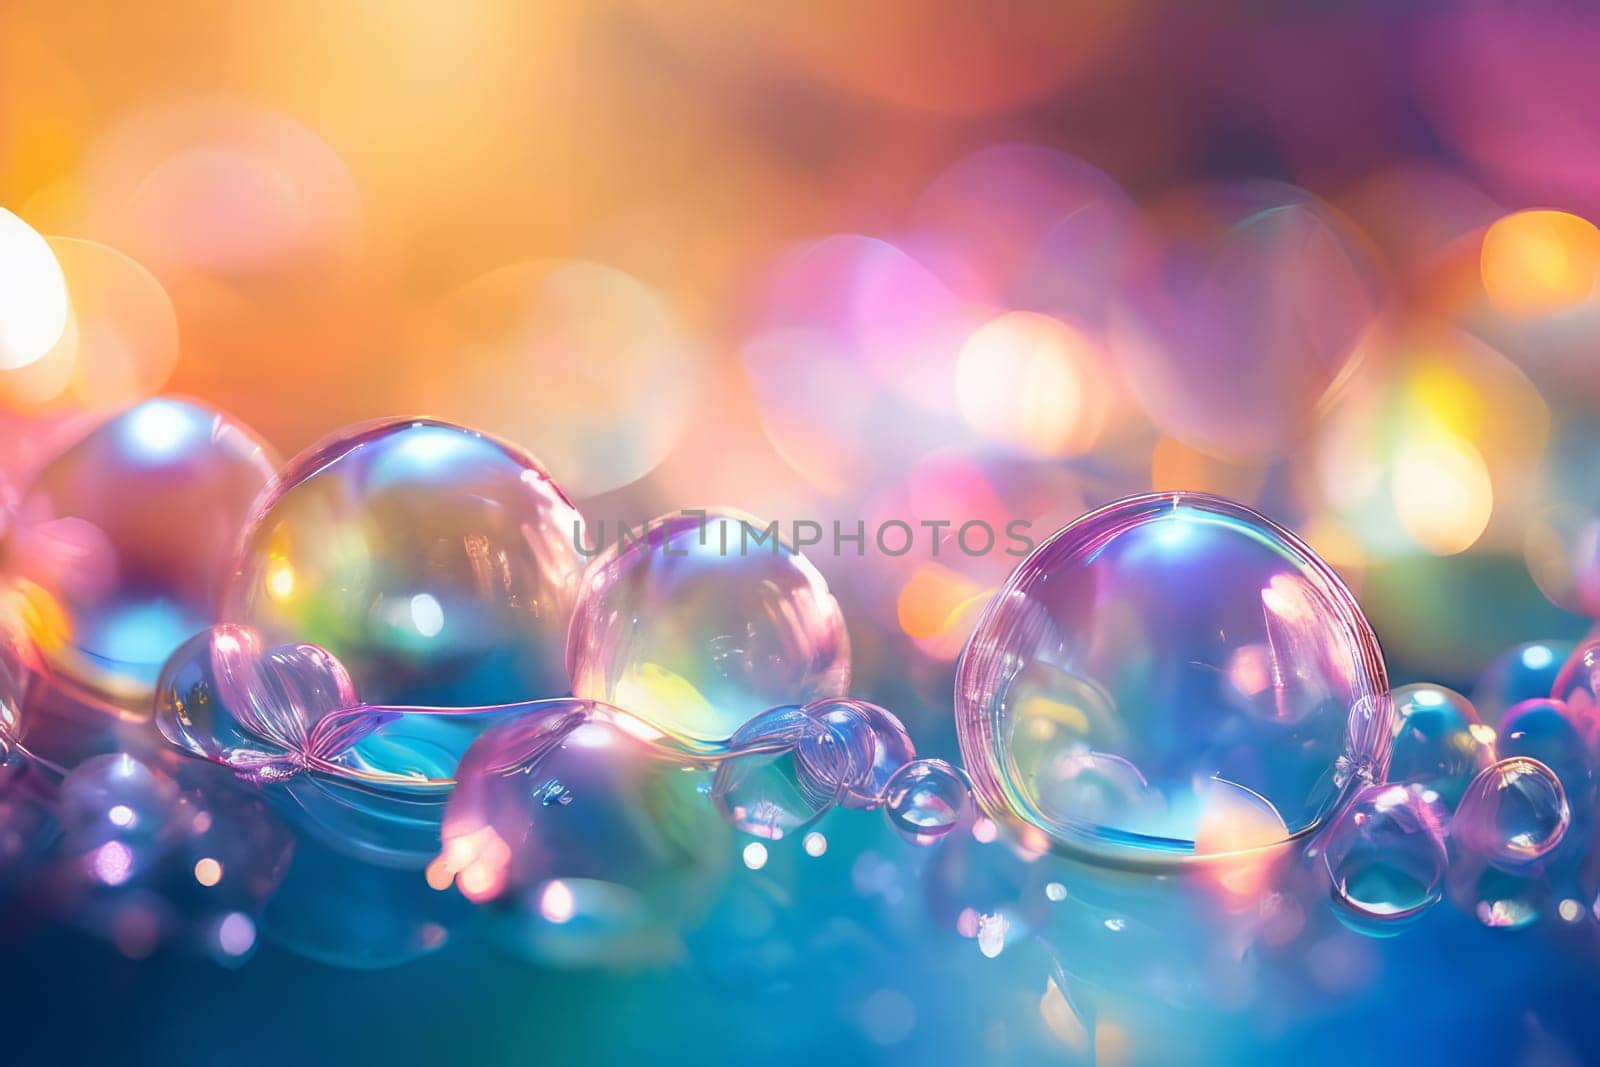 Playful abstract background with bubbles and colorful shimmering